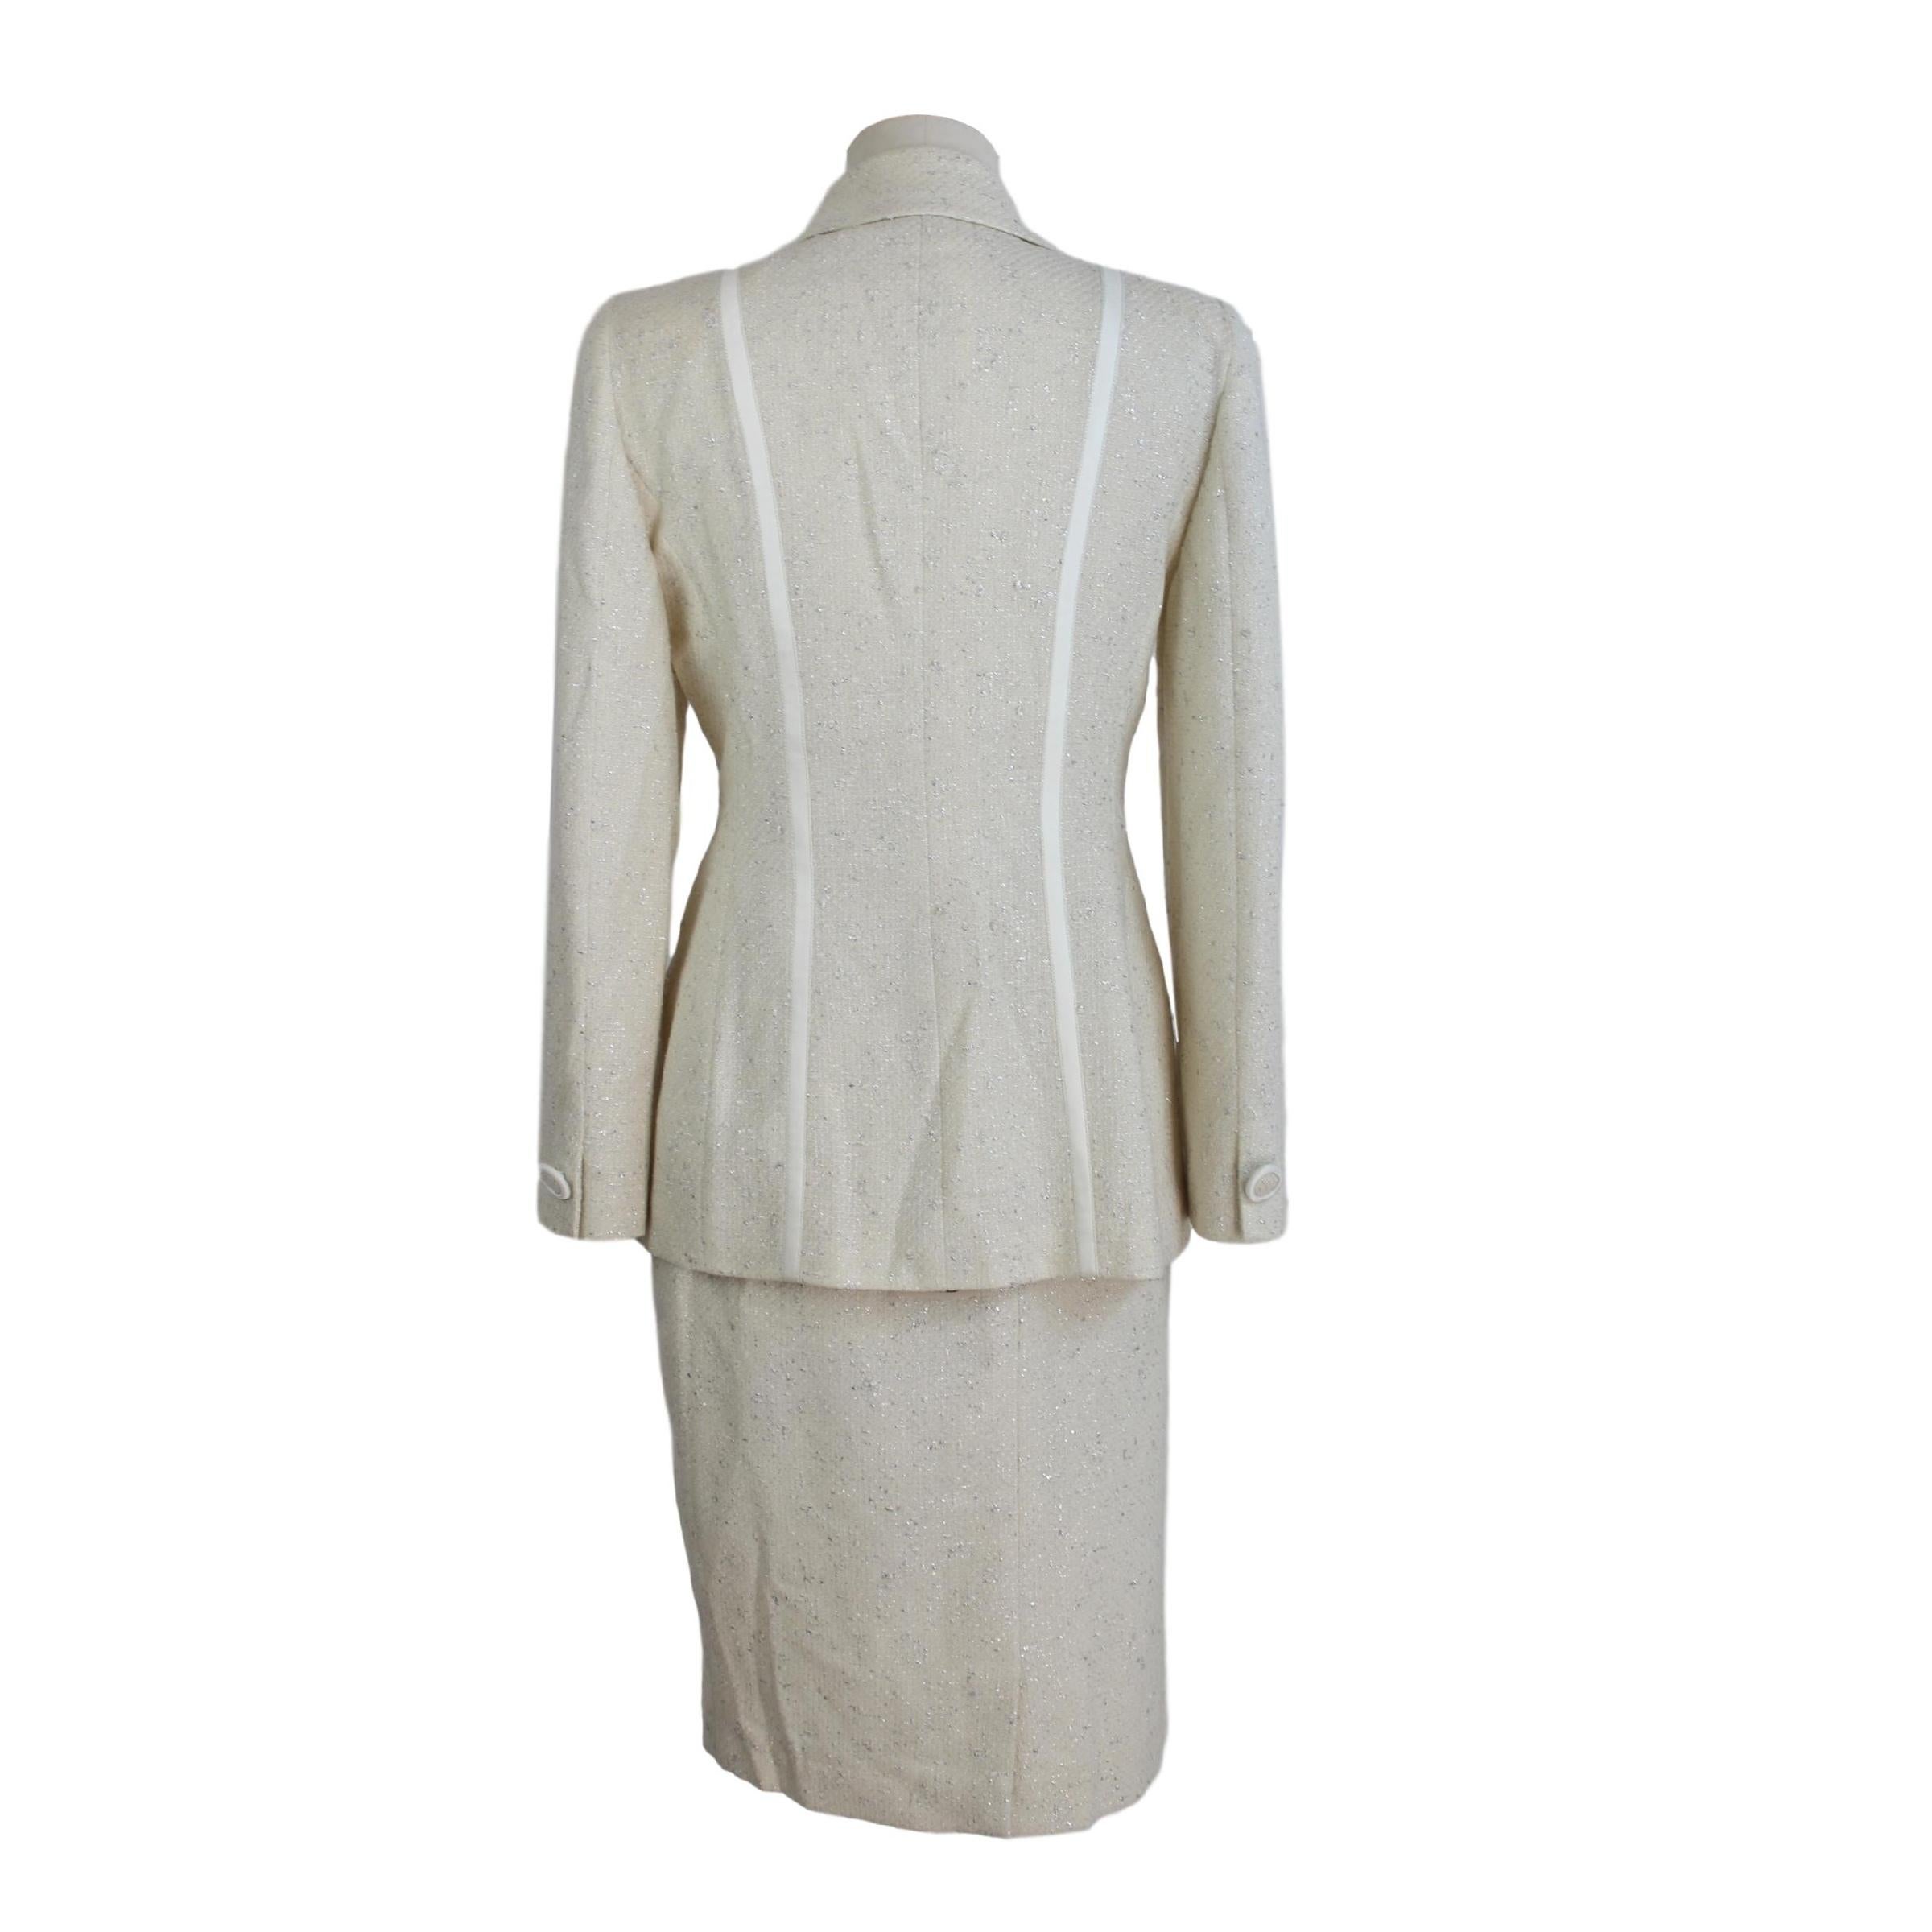 Annalisa Ferro elegant women's suit skirt. Suit consisting of jacket and skirt,58% wool 25% cotton 9% polyamide 8% polyester. White color with silver threads. The jacket with two buttons closure. Long skirt on sheath knee. Made in Italy.

Size 44 It